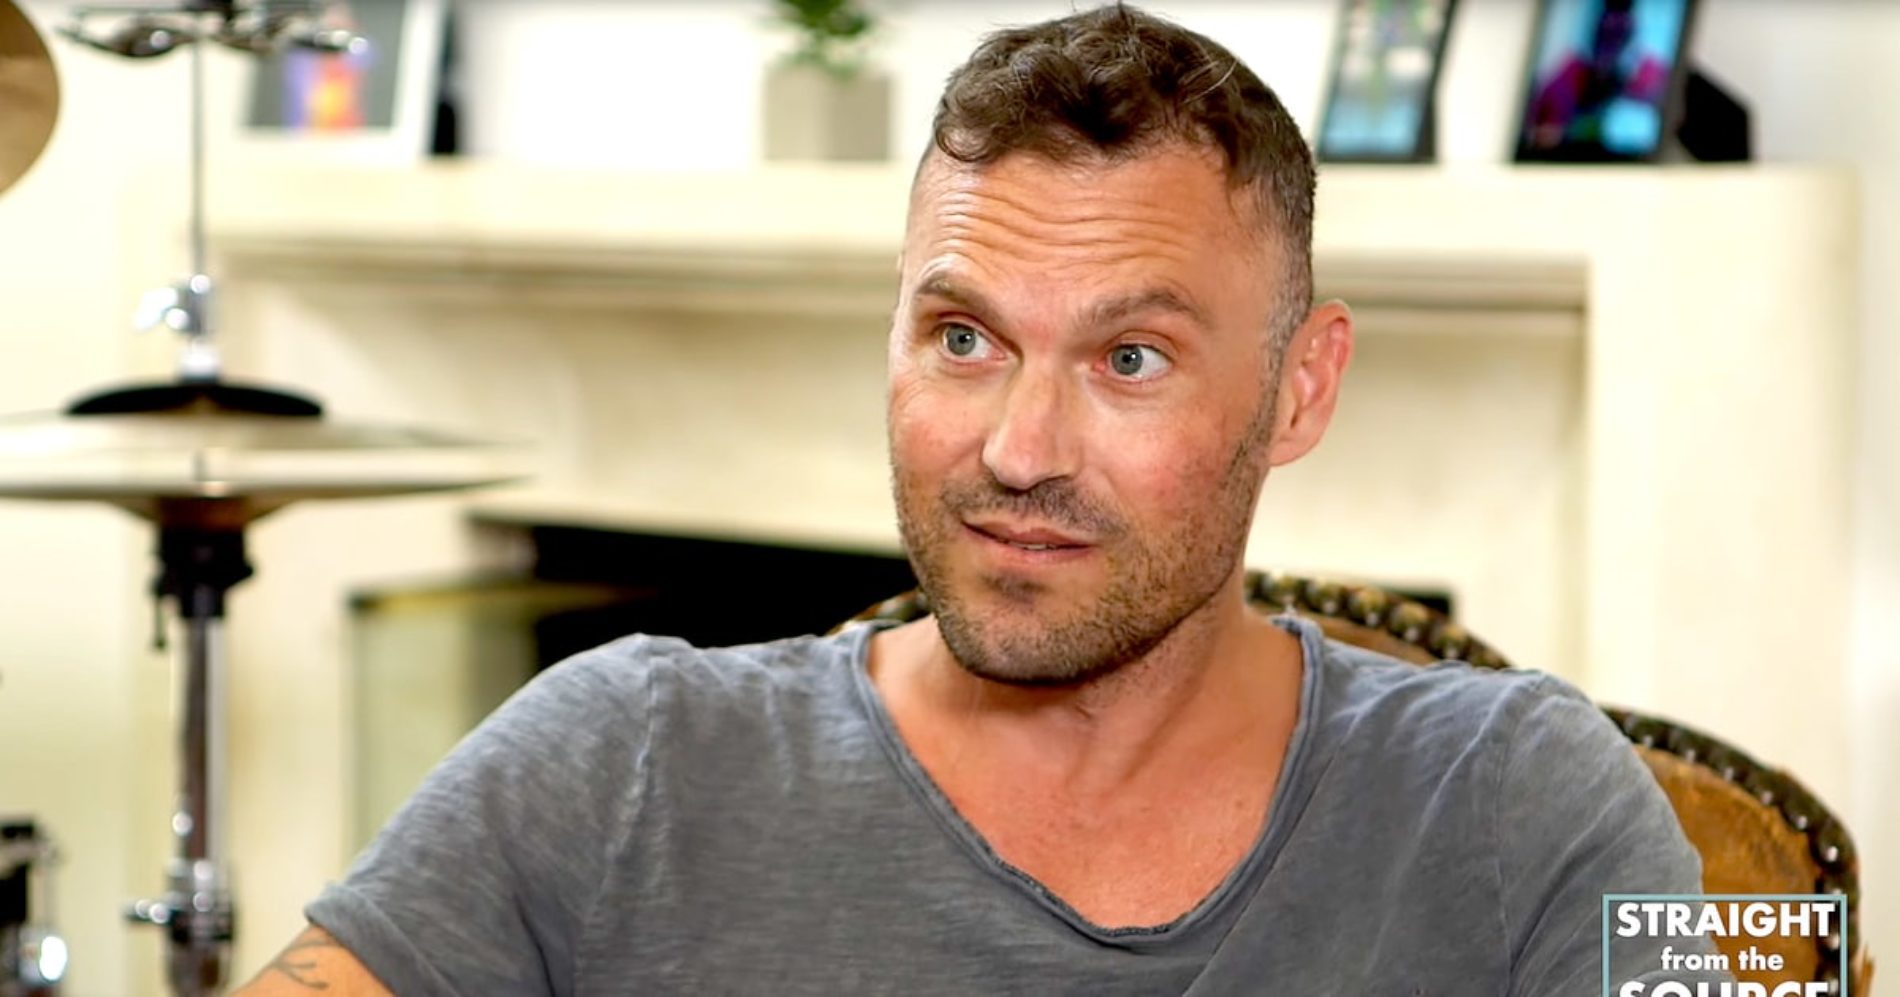 “If he wants to wear a dress…Awesome.” Actor Brian Austin Green defends son’s attire